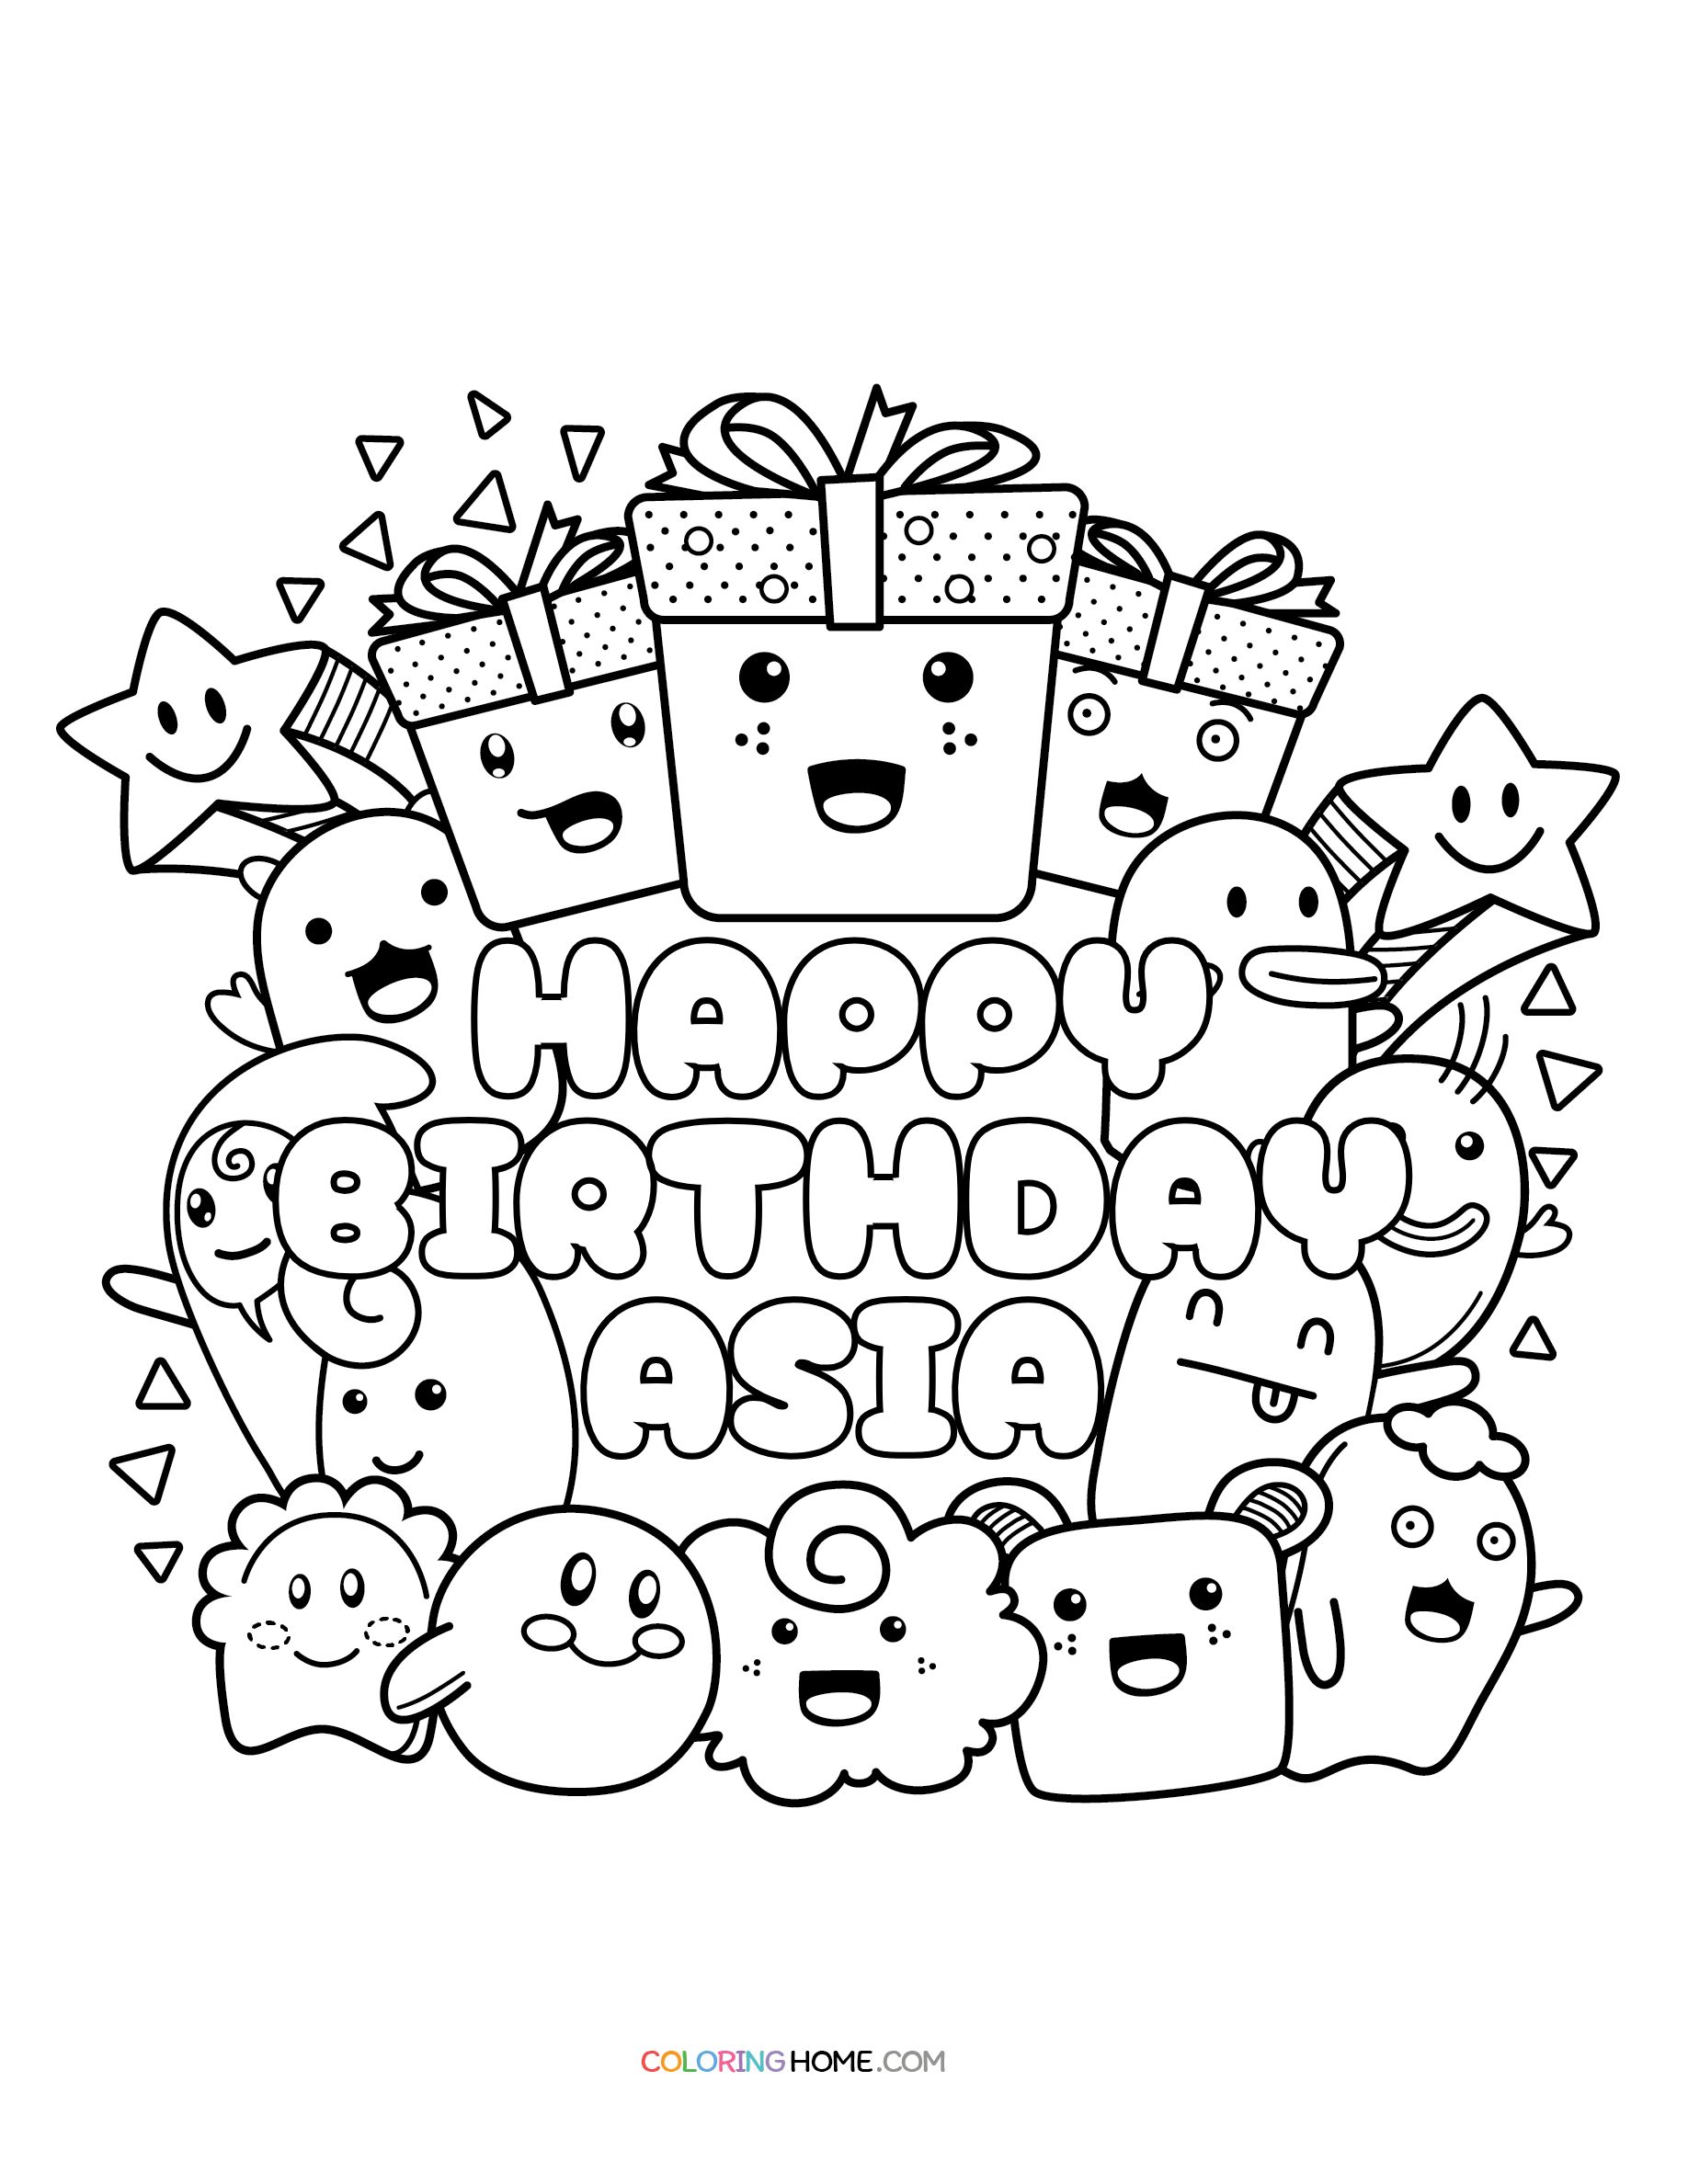 Happy Birthday Asia coloring page